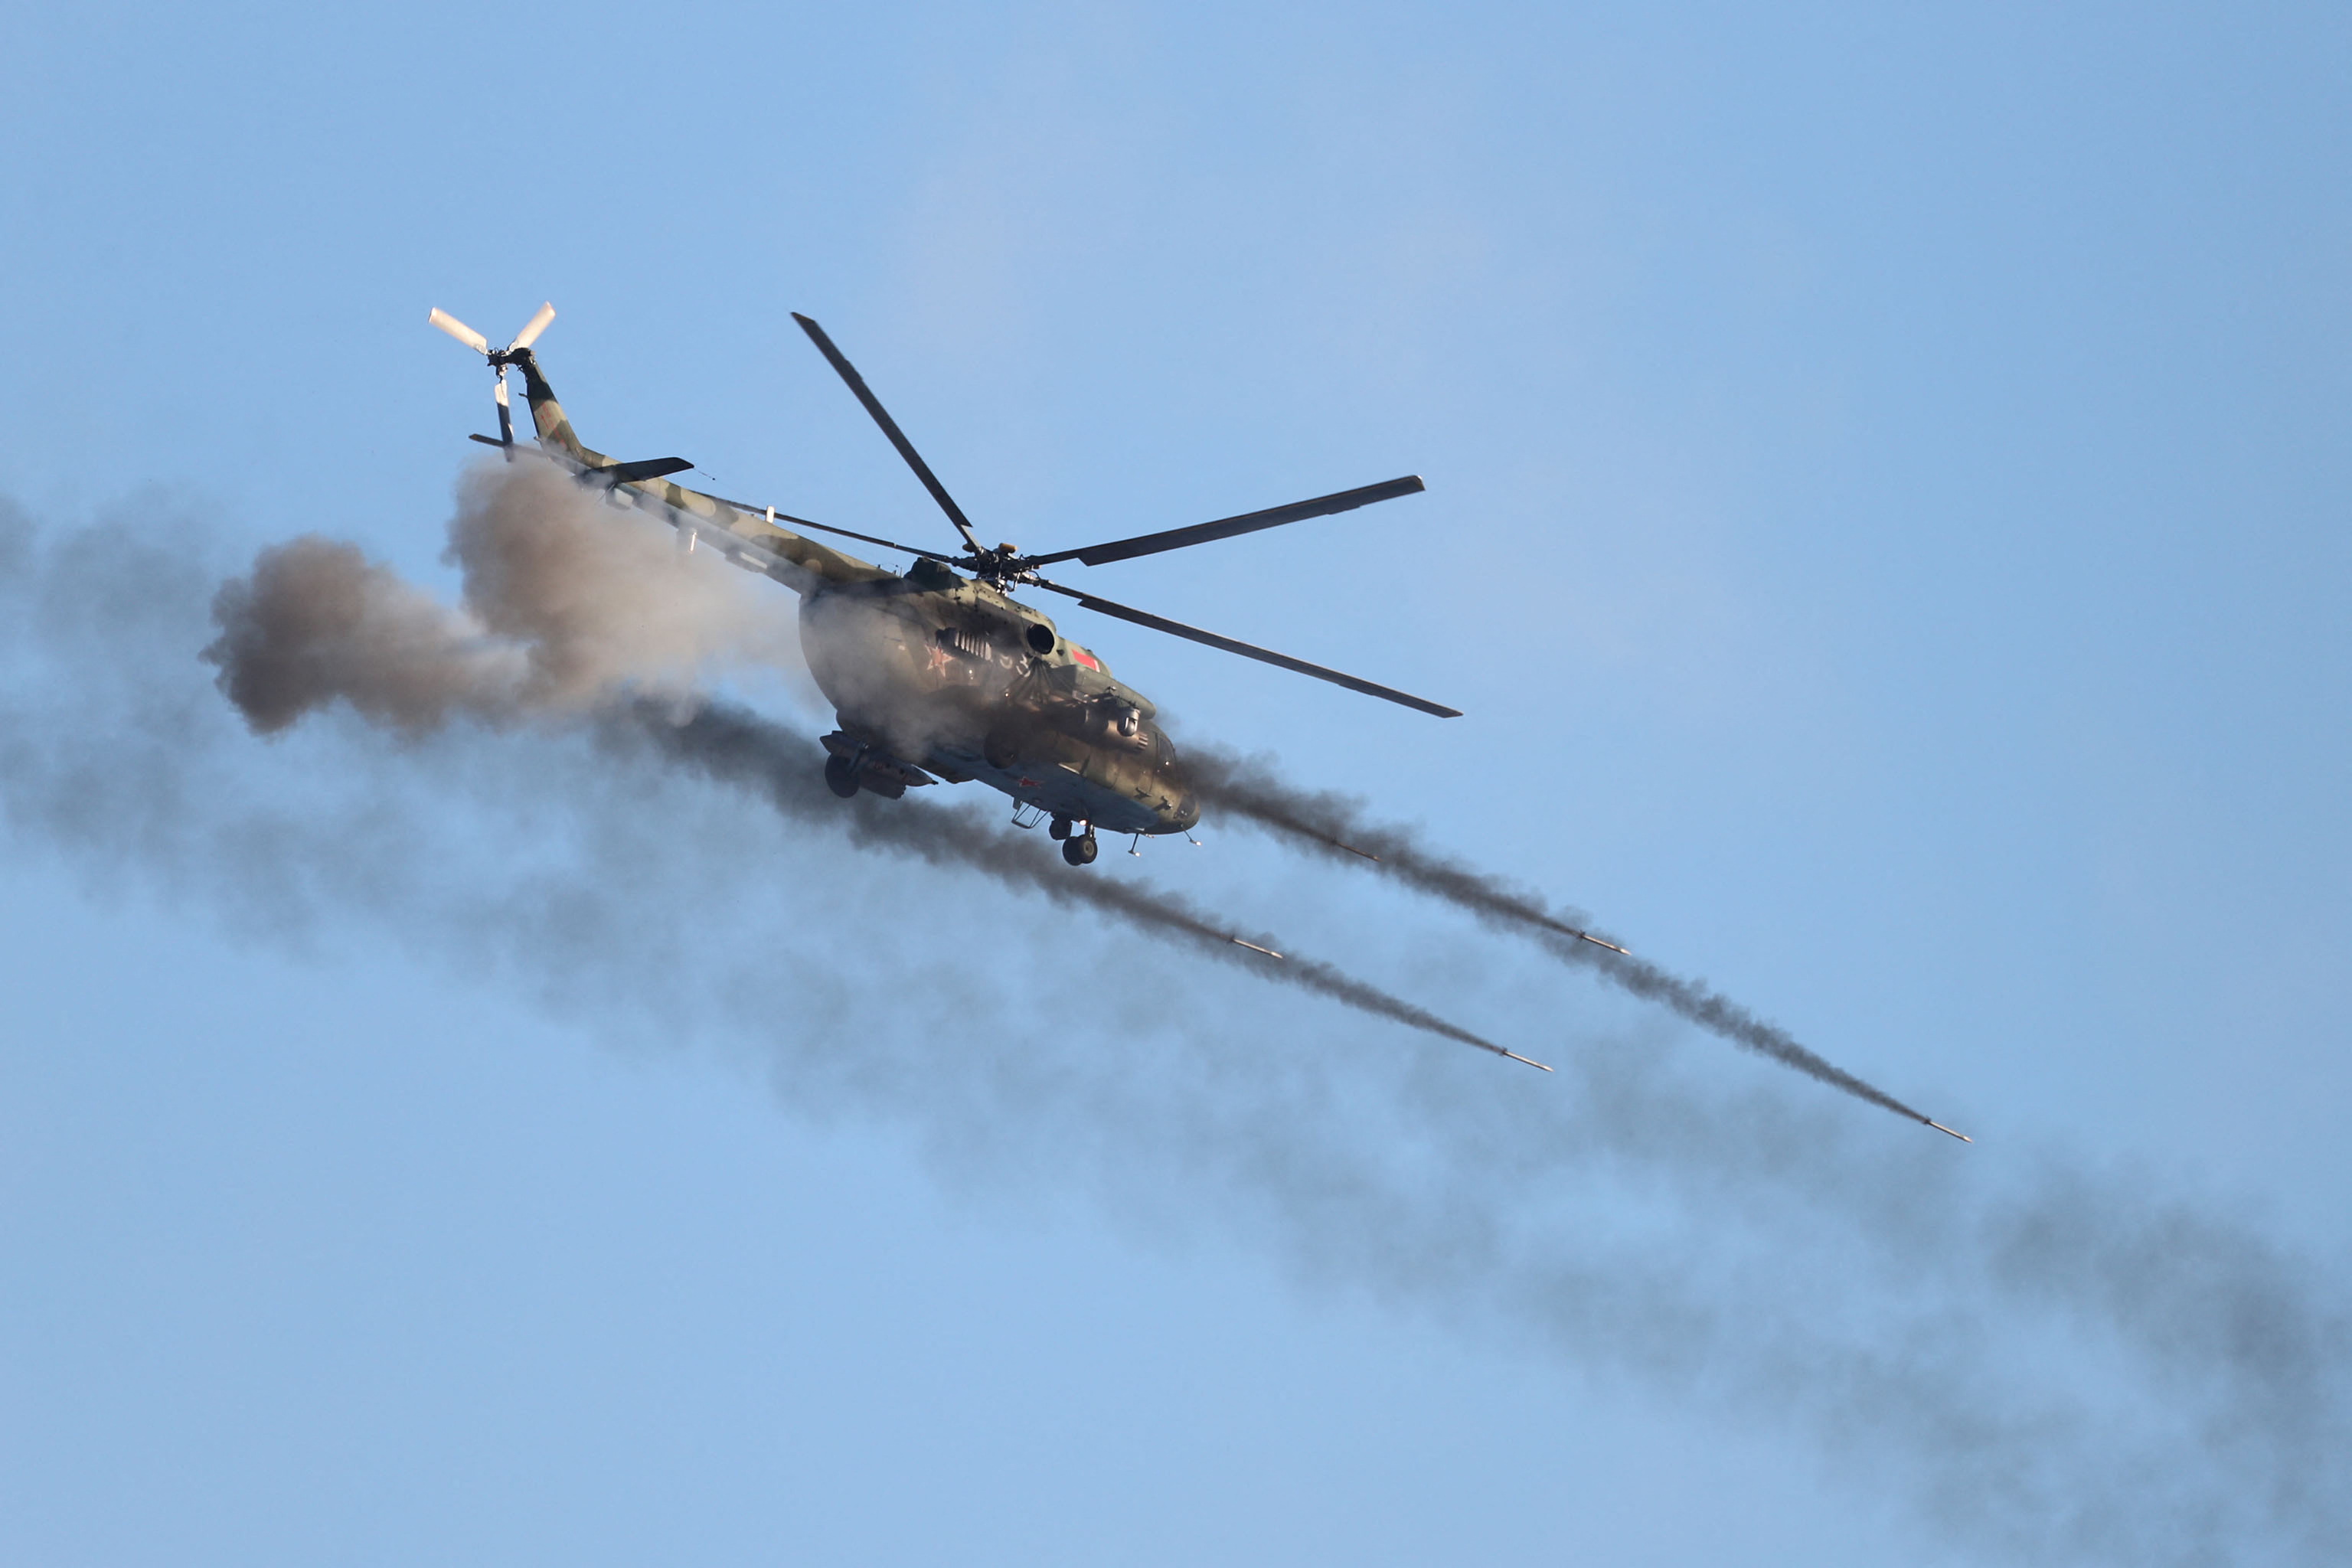 Armed forces of Russia and Belarus hold joint drills in Grodno region